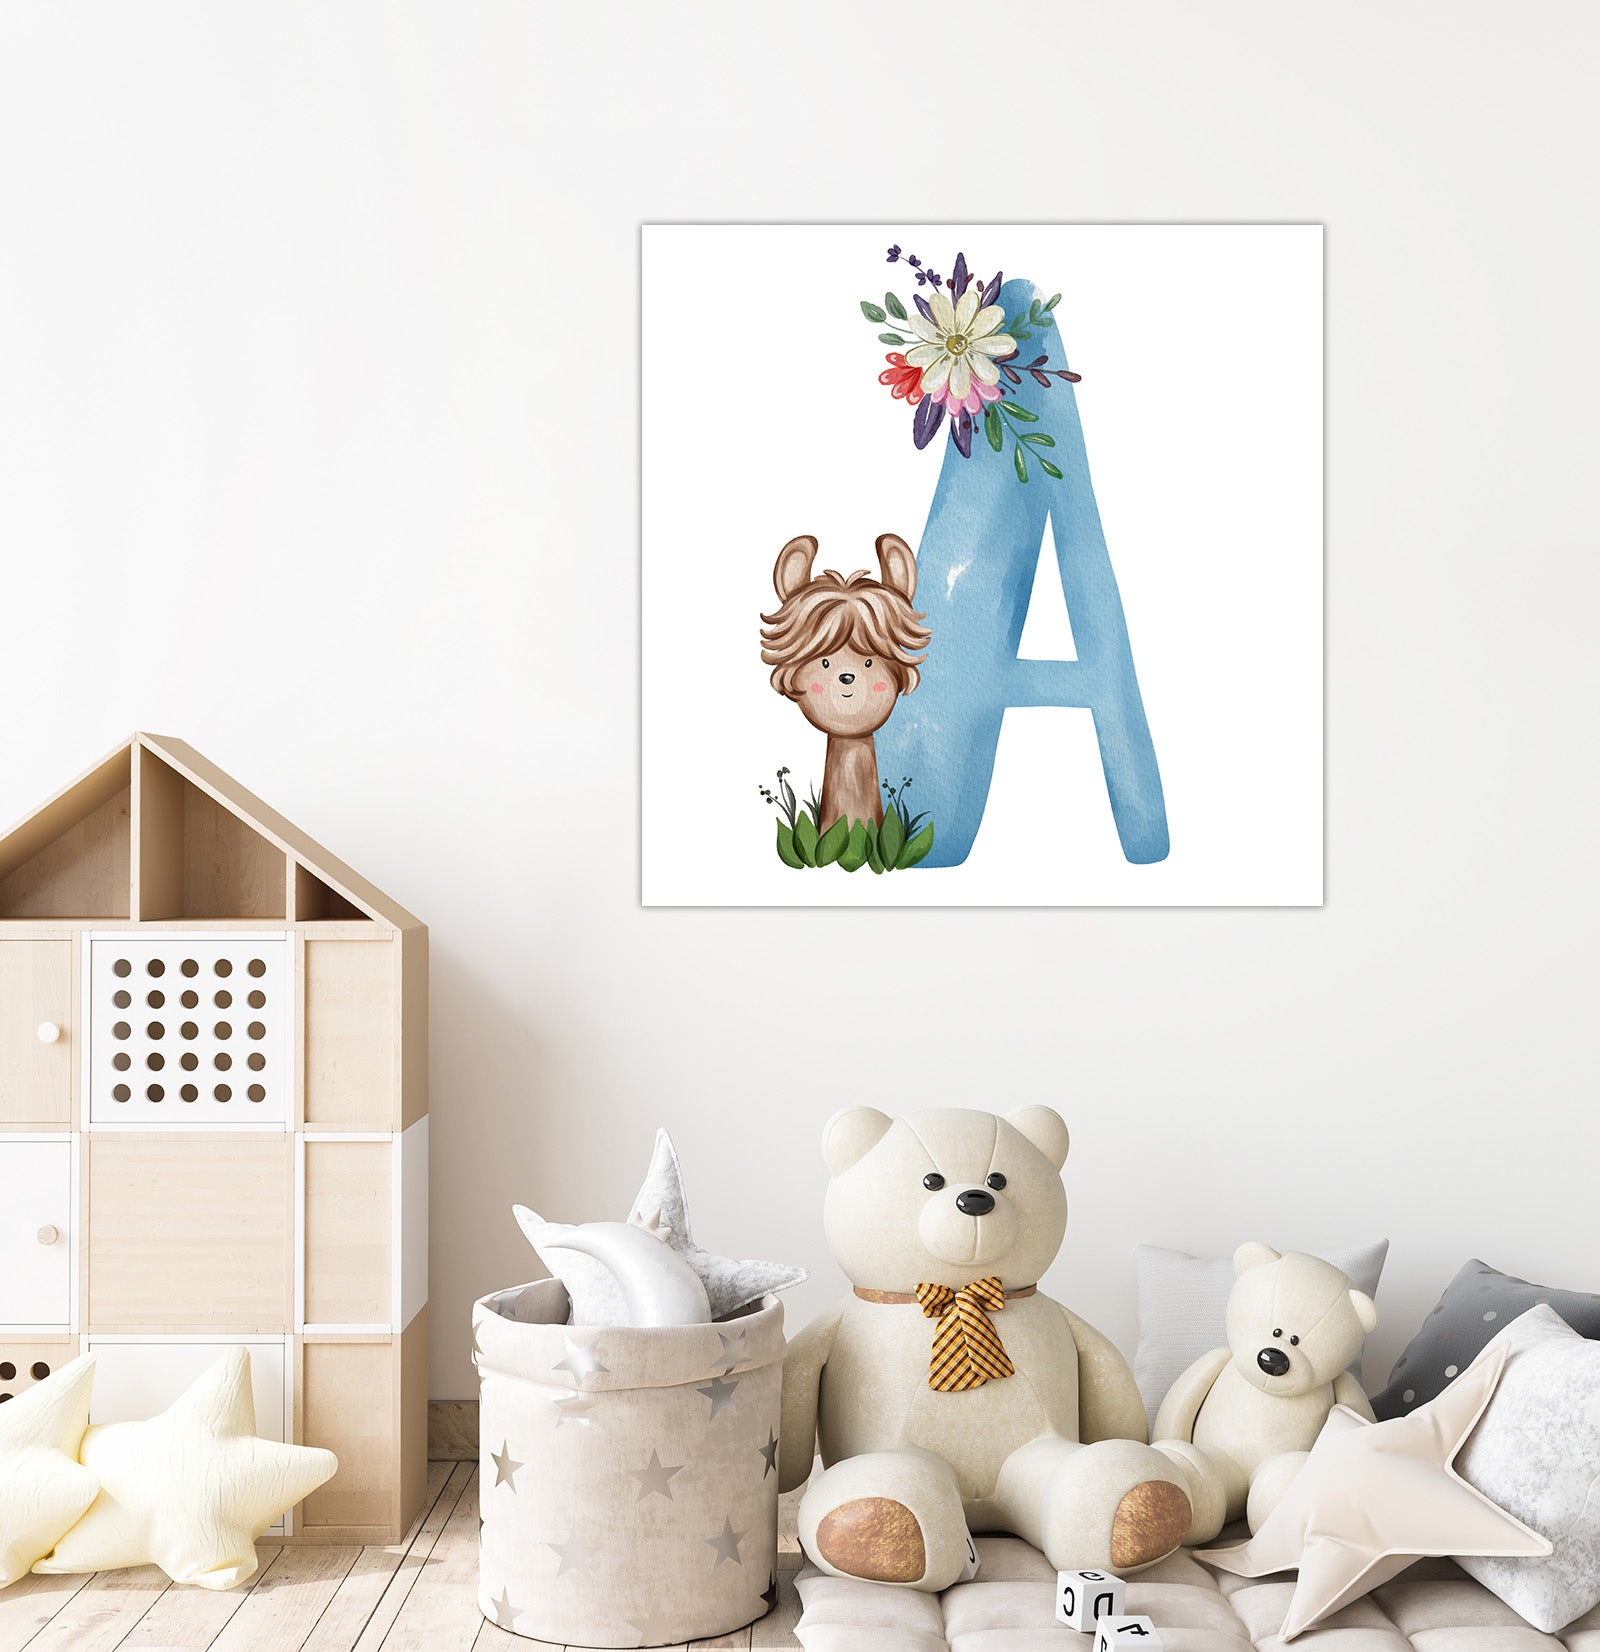 Wall Art For Kids' Room (Letter A)